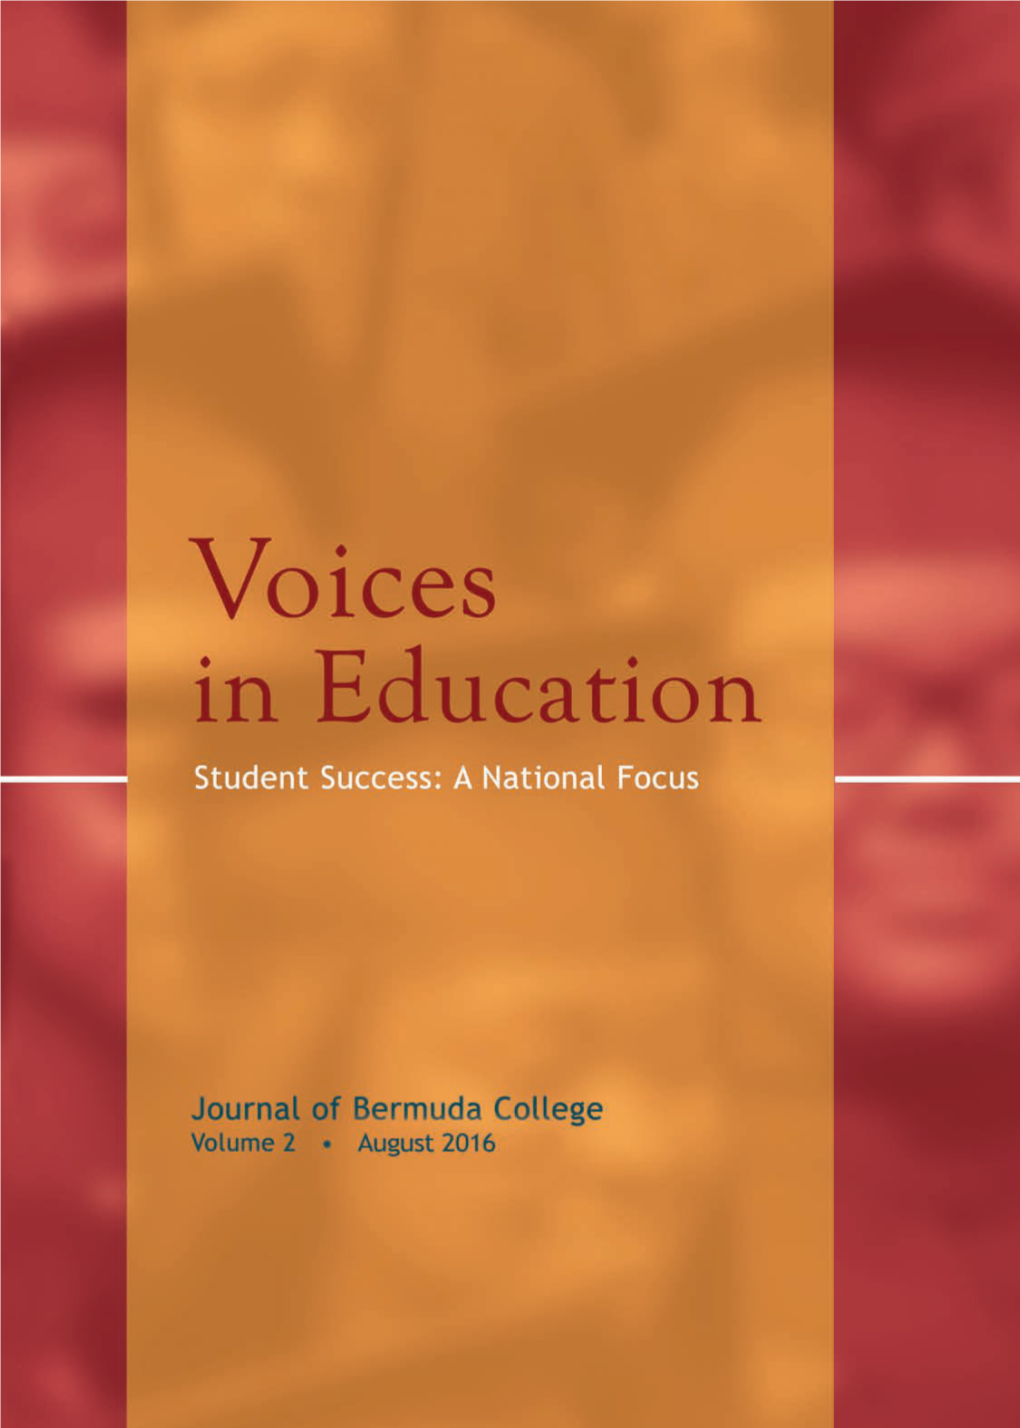 VOICES in EDUCATION Vol. 2, August 2016